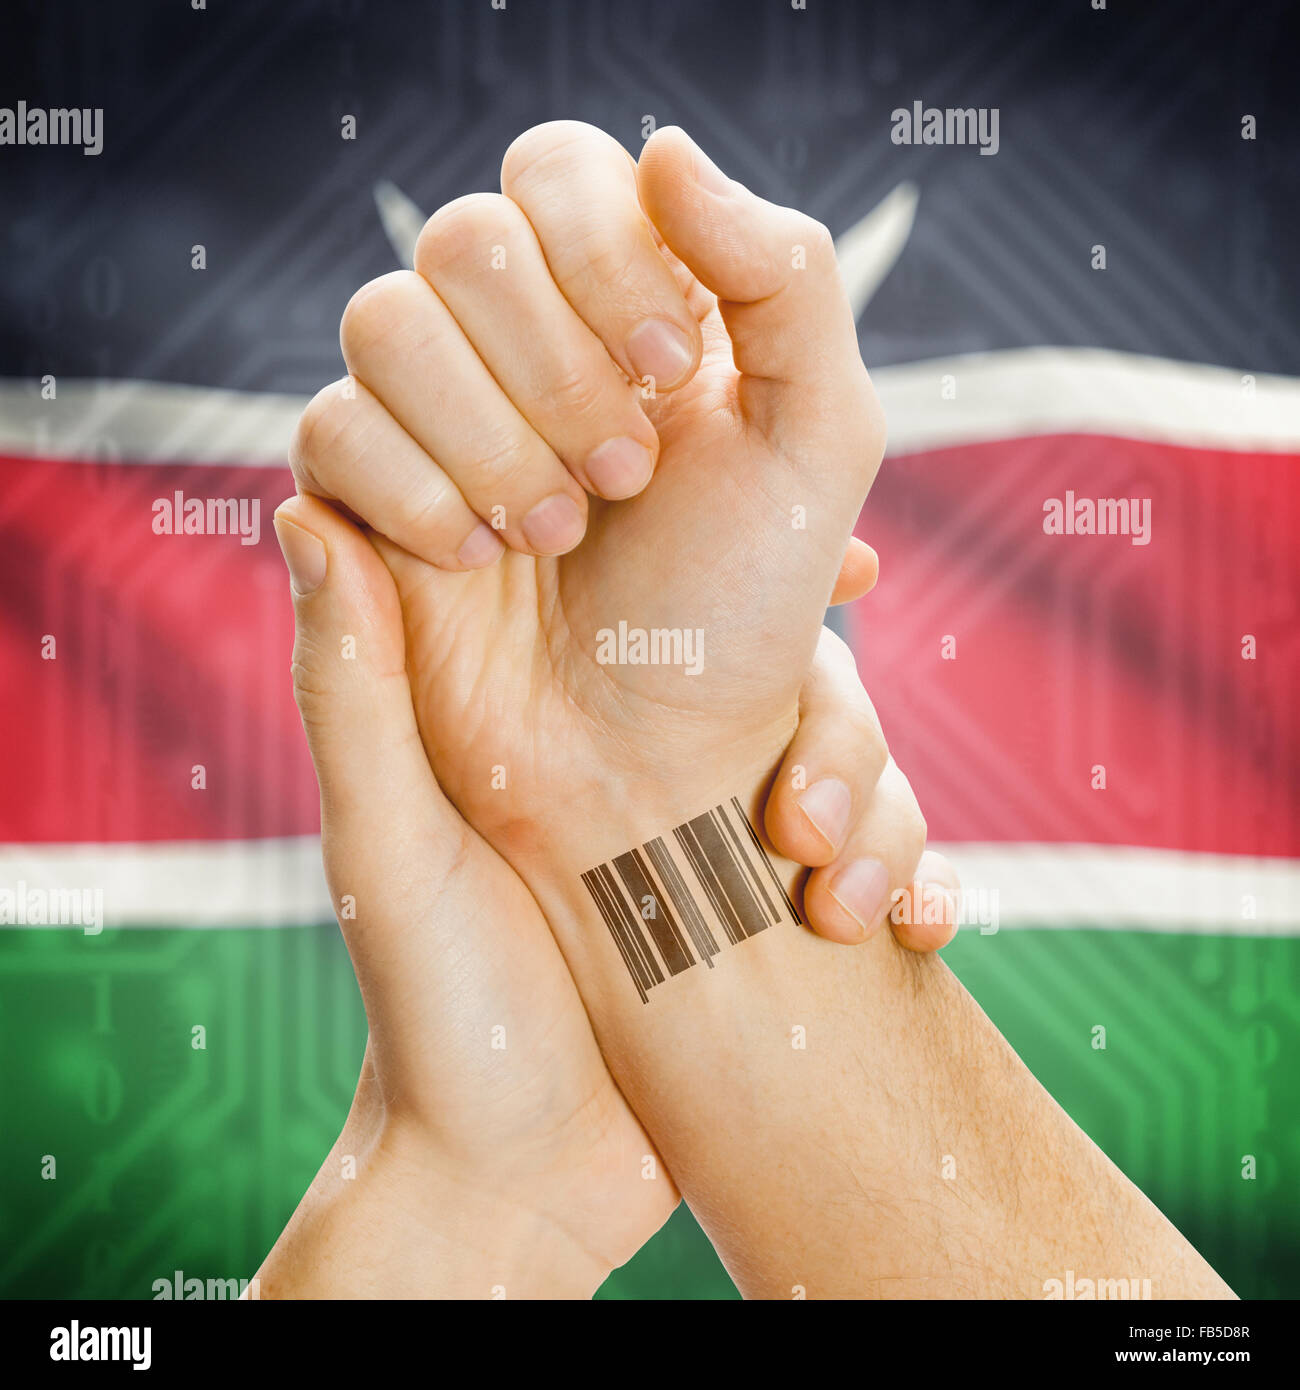 Barcode ID number on wrist of a human and national flag on background series - Kenya Stock Photo